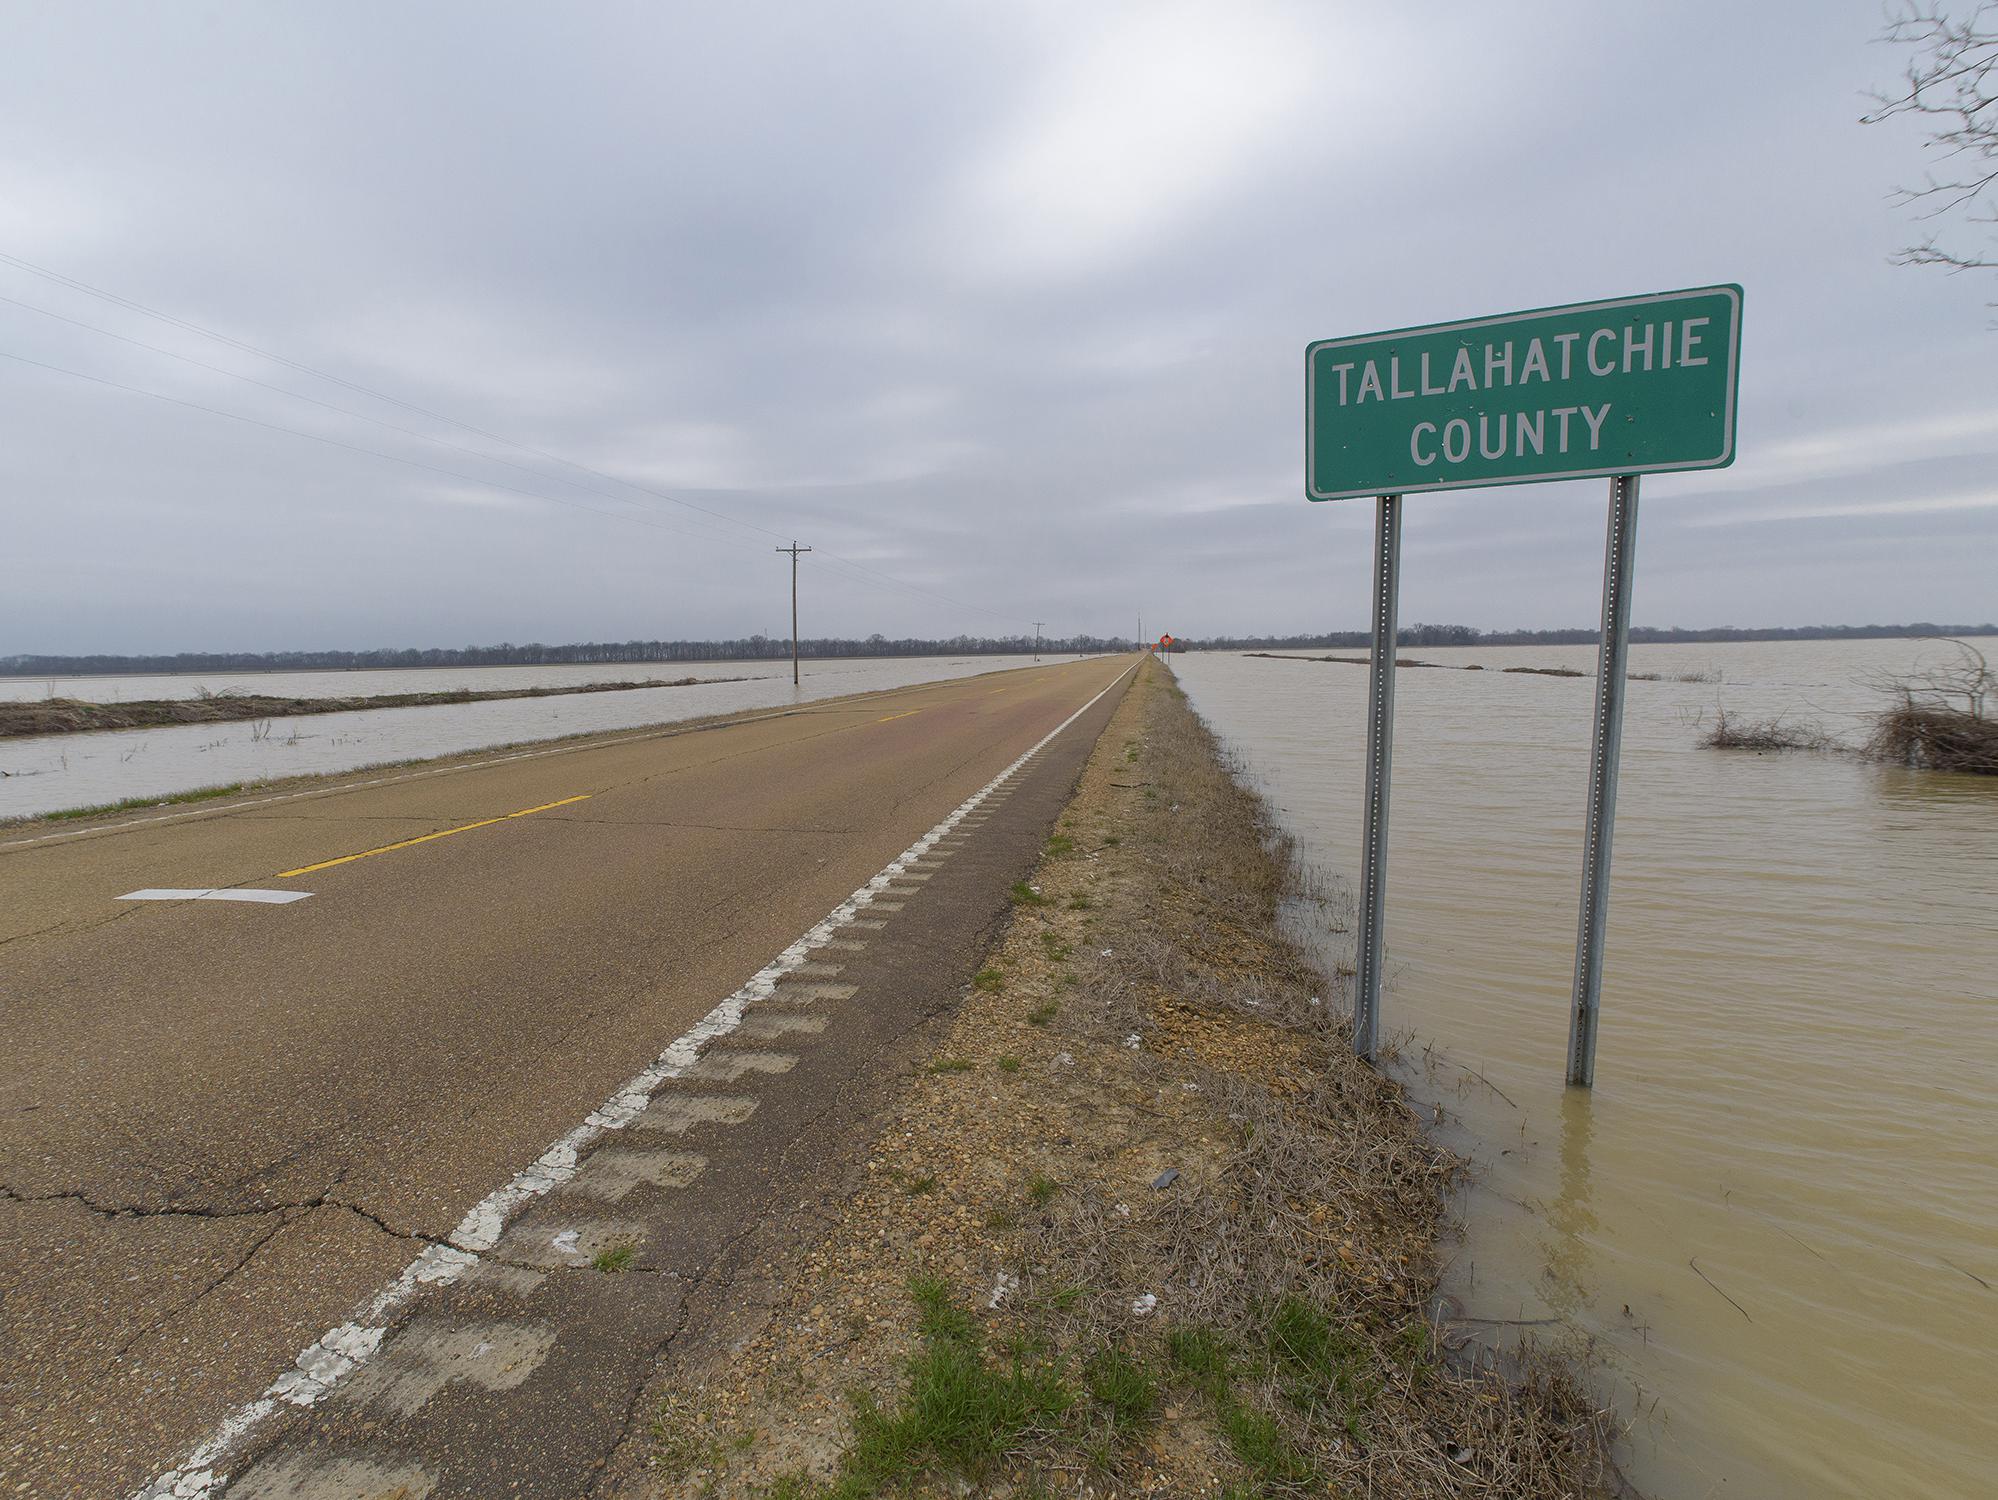 The view down a two-lane road with a wide expanse of water on each side and nearly touching the road. A road sign marks the Tallahatchie County line.